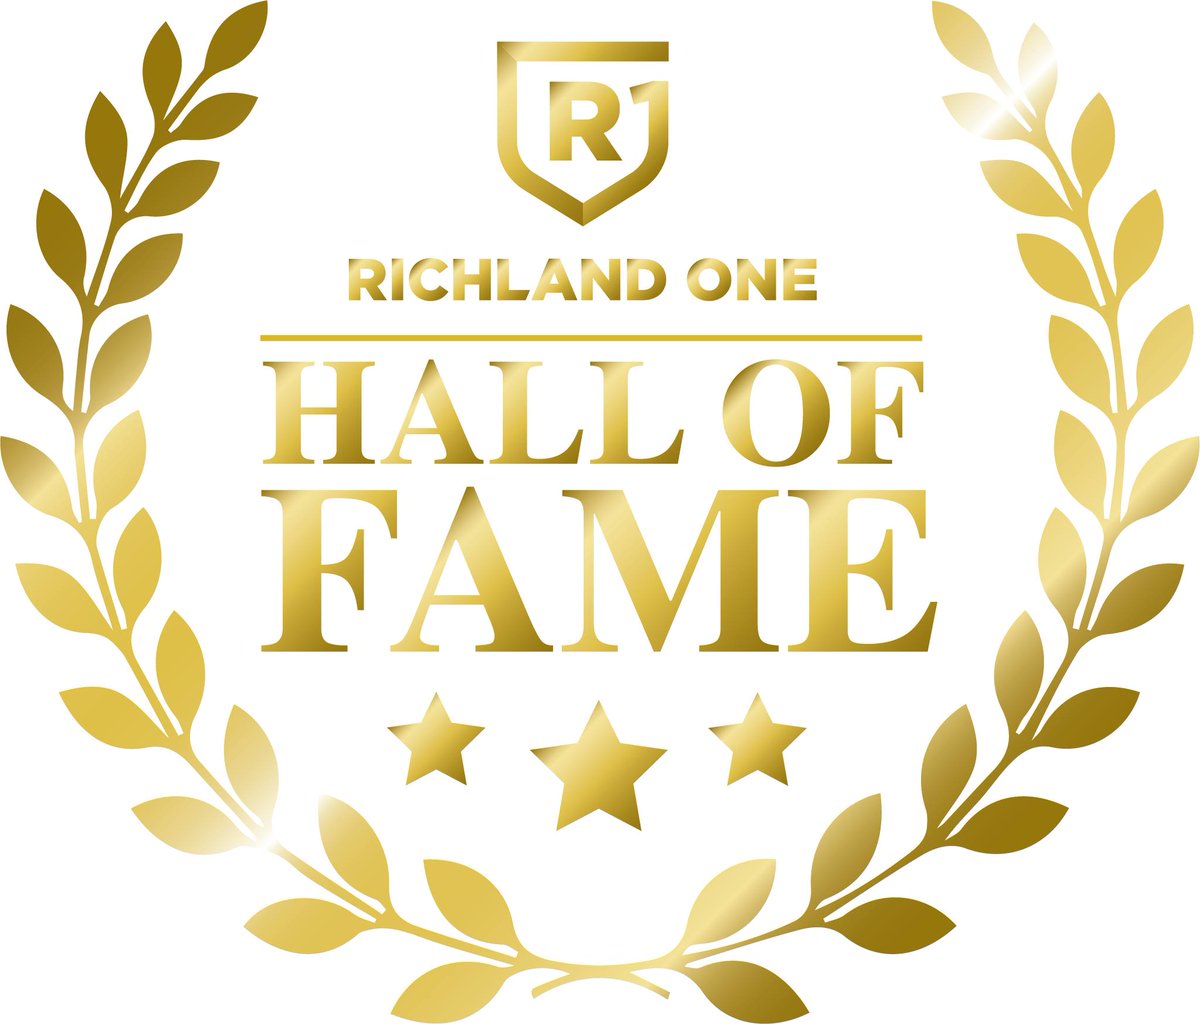 Nominations are open for the 2024 Richland One Hall of Fame induction class. Nominations must be submitted online by August 23 at 5 p.m. Access the eligibility criteria and nomination packet here: richlandone.org/site/default.a… #TeamOne #OneTeam